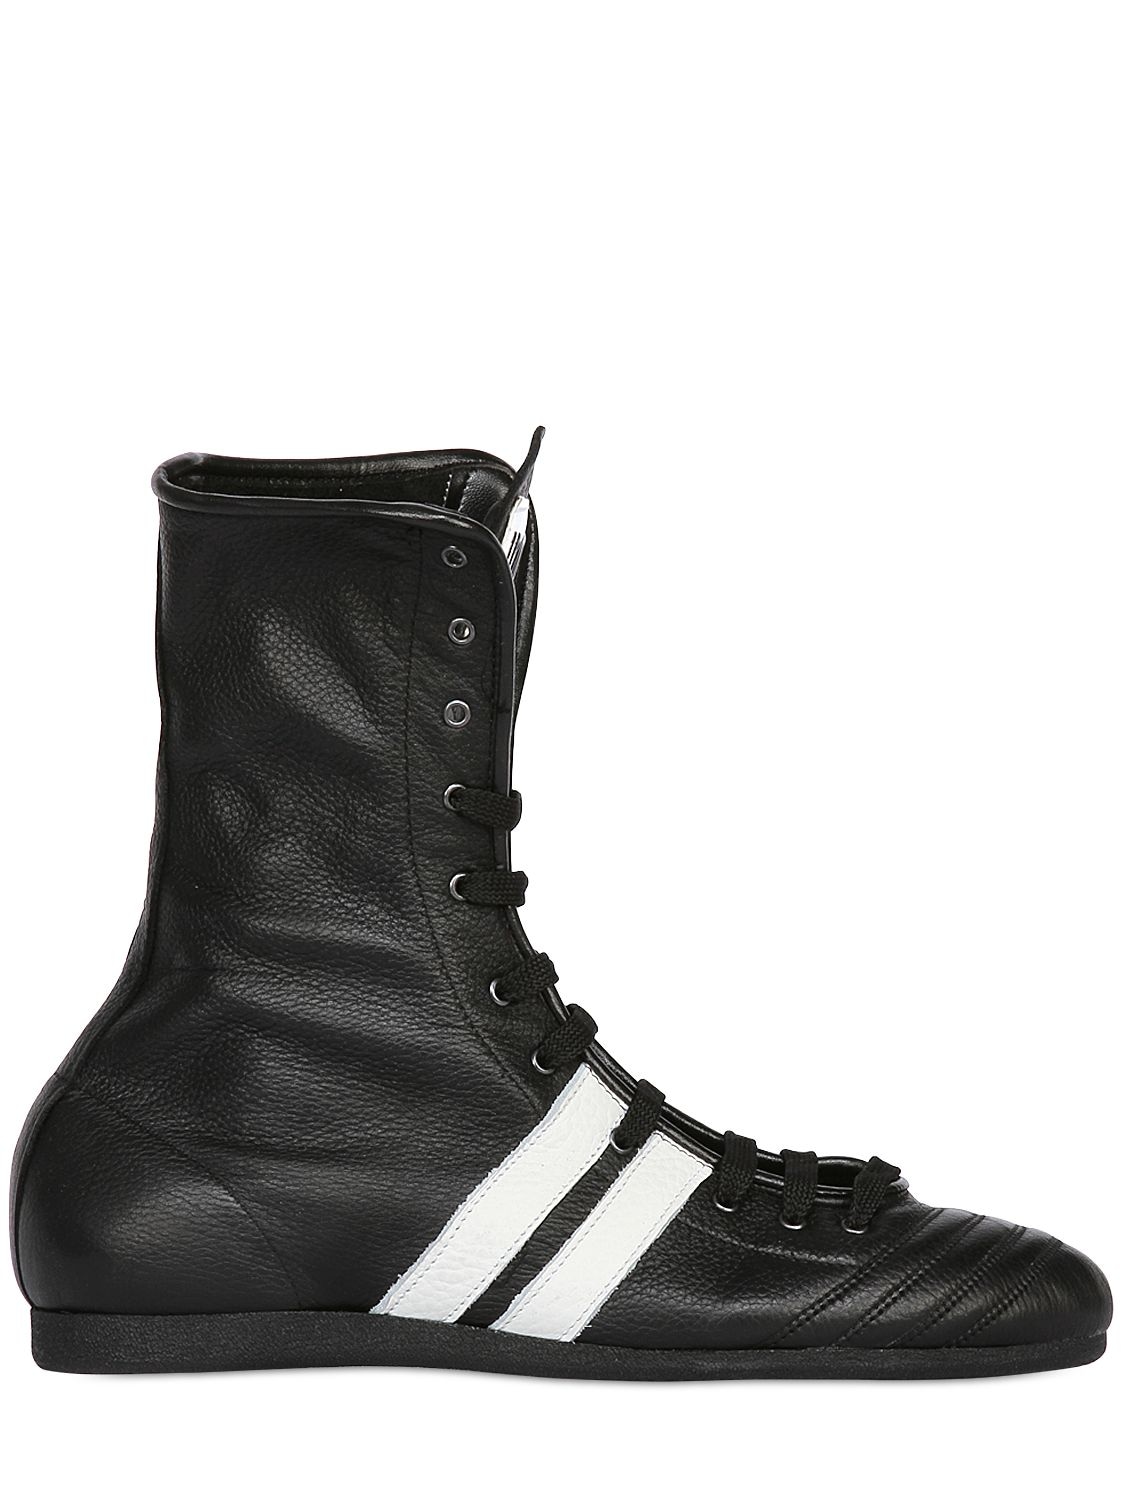 Leone 1947 Handmade Leather Boxing Boots In Black